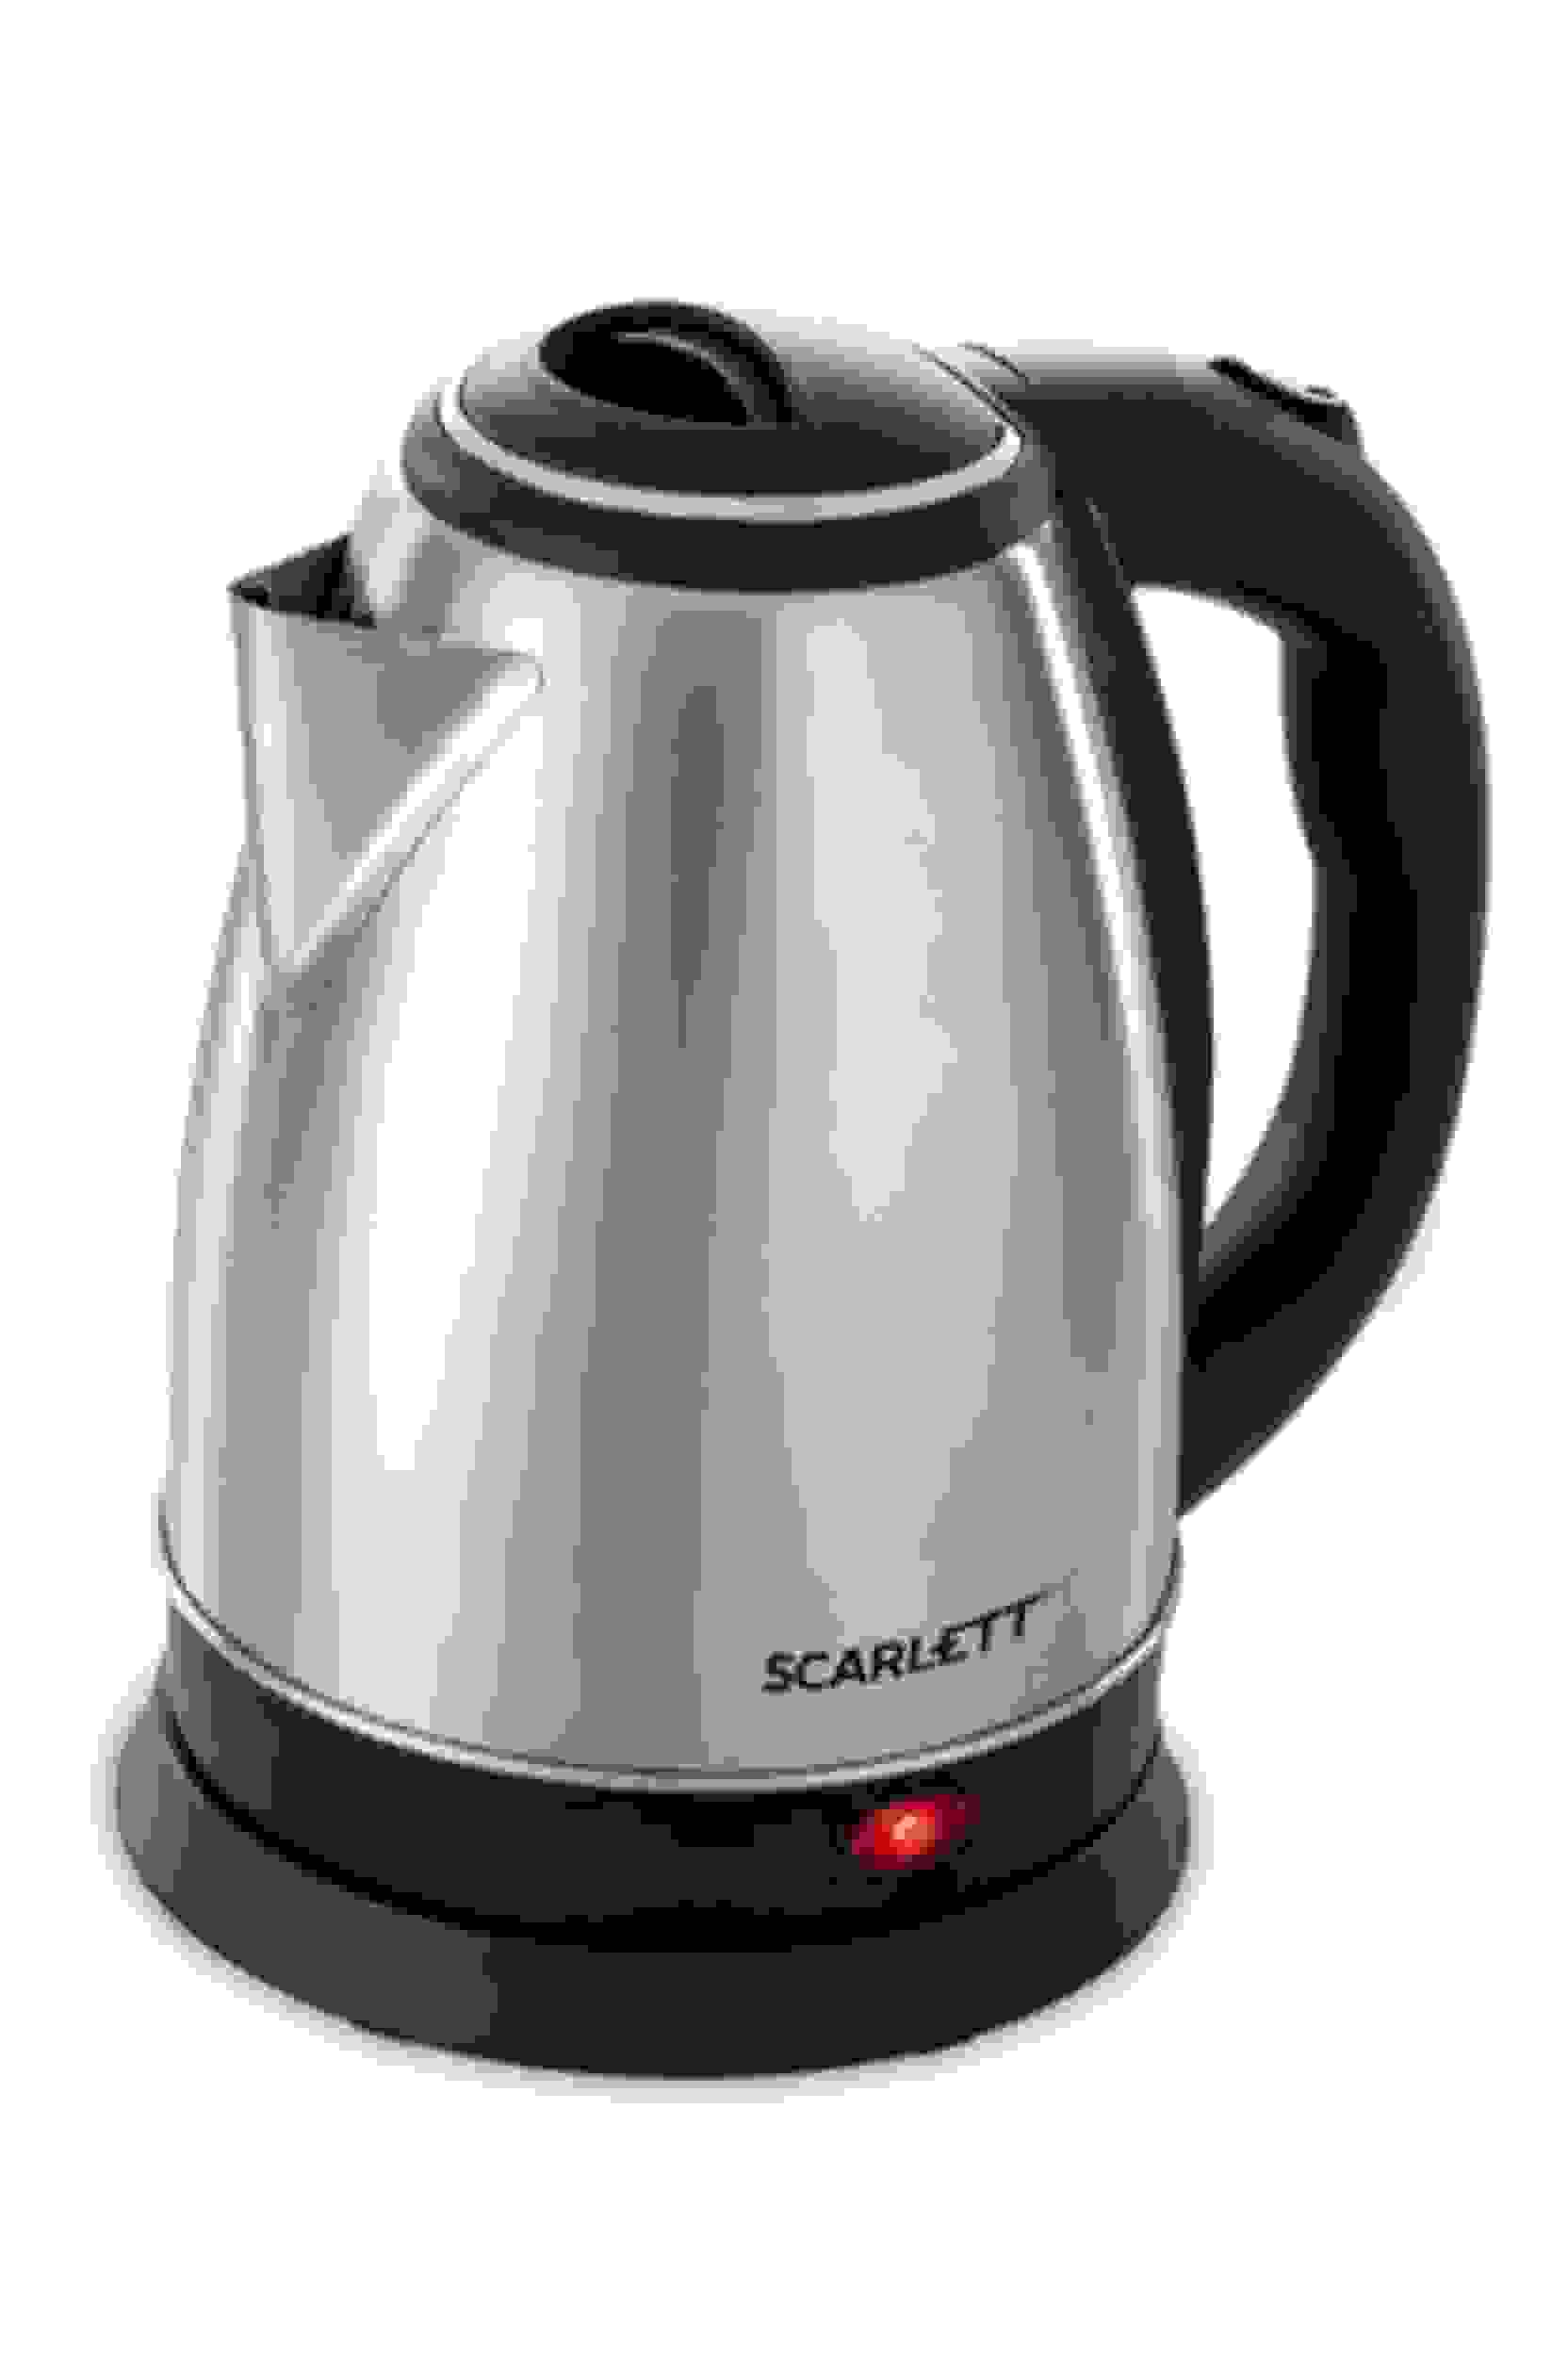 SCARLET Stainless Steel Electric Kettle: 2.0 Liter, For Personal